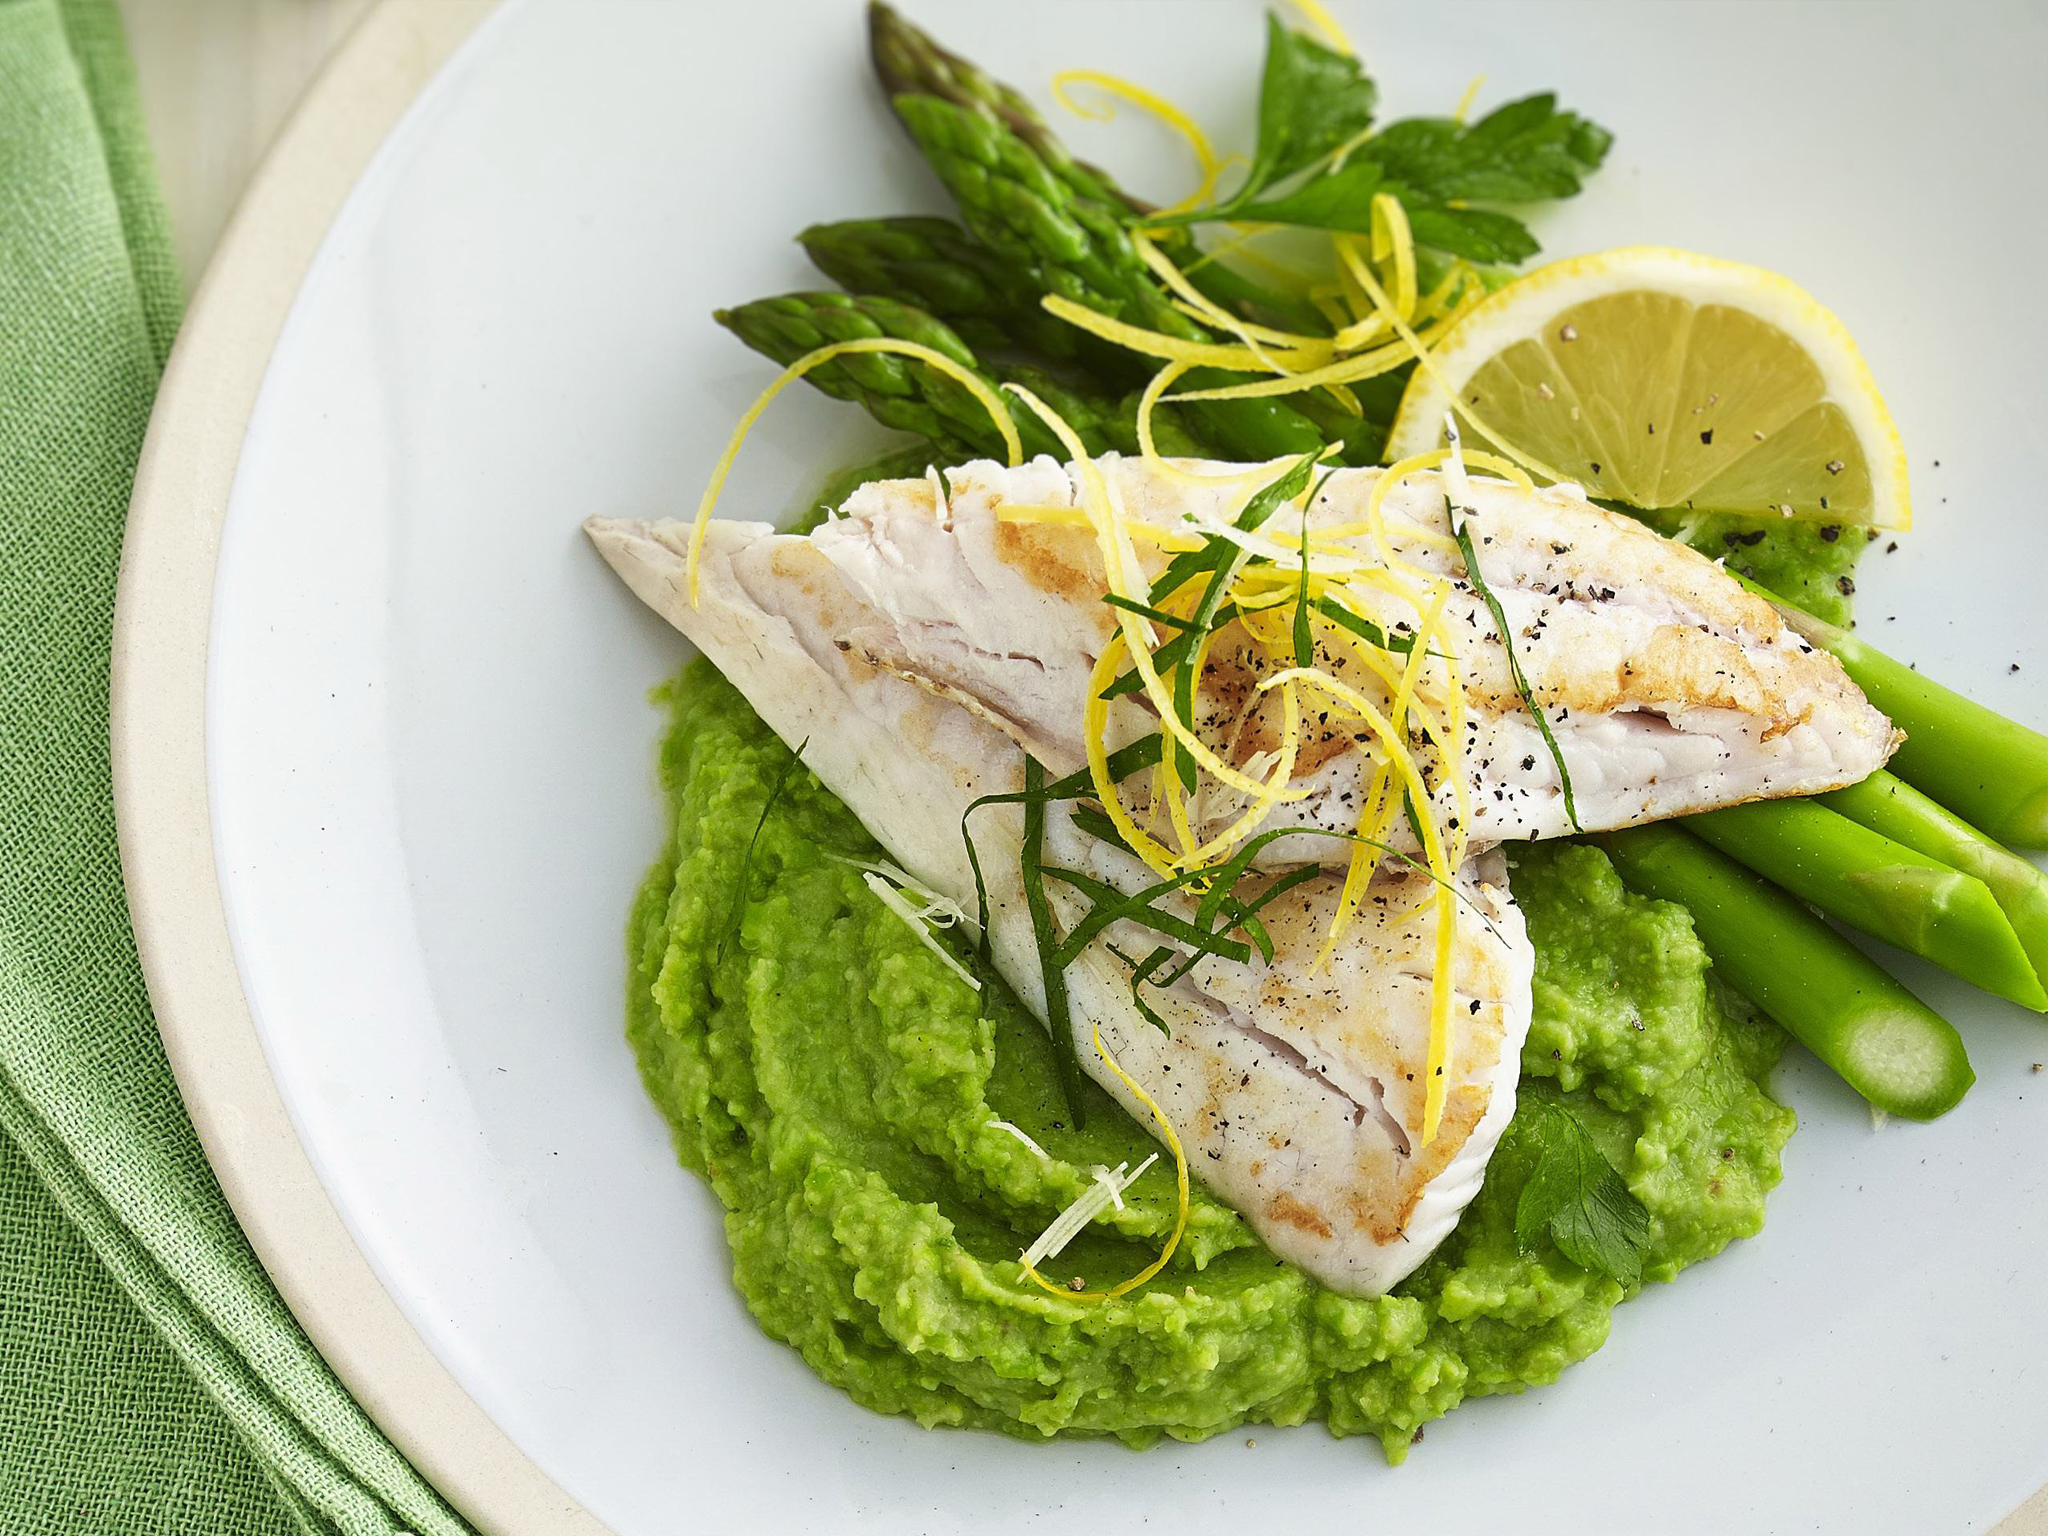 pan-fried fish with green purée